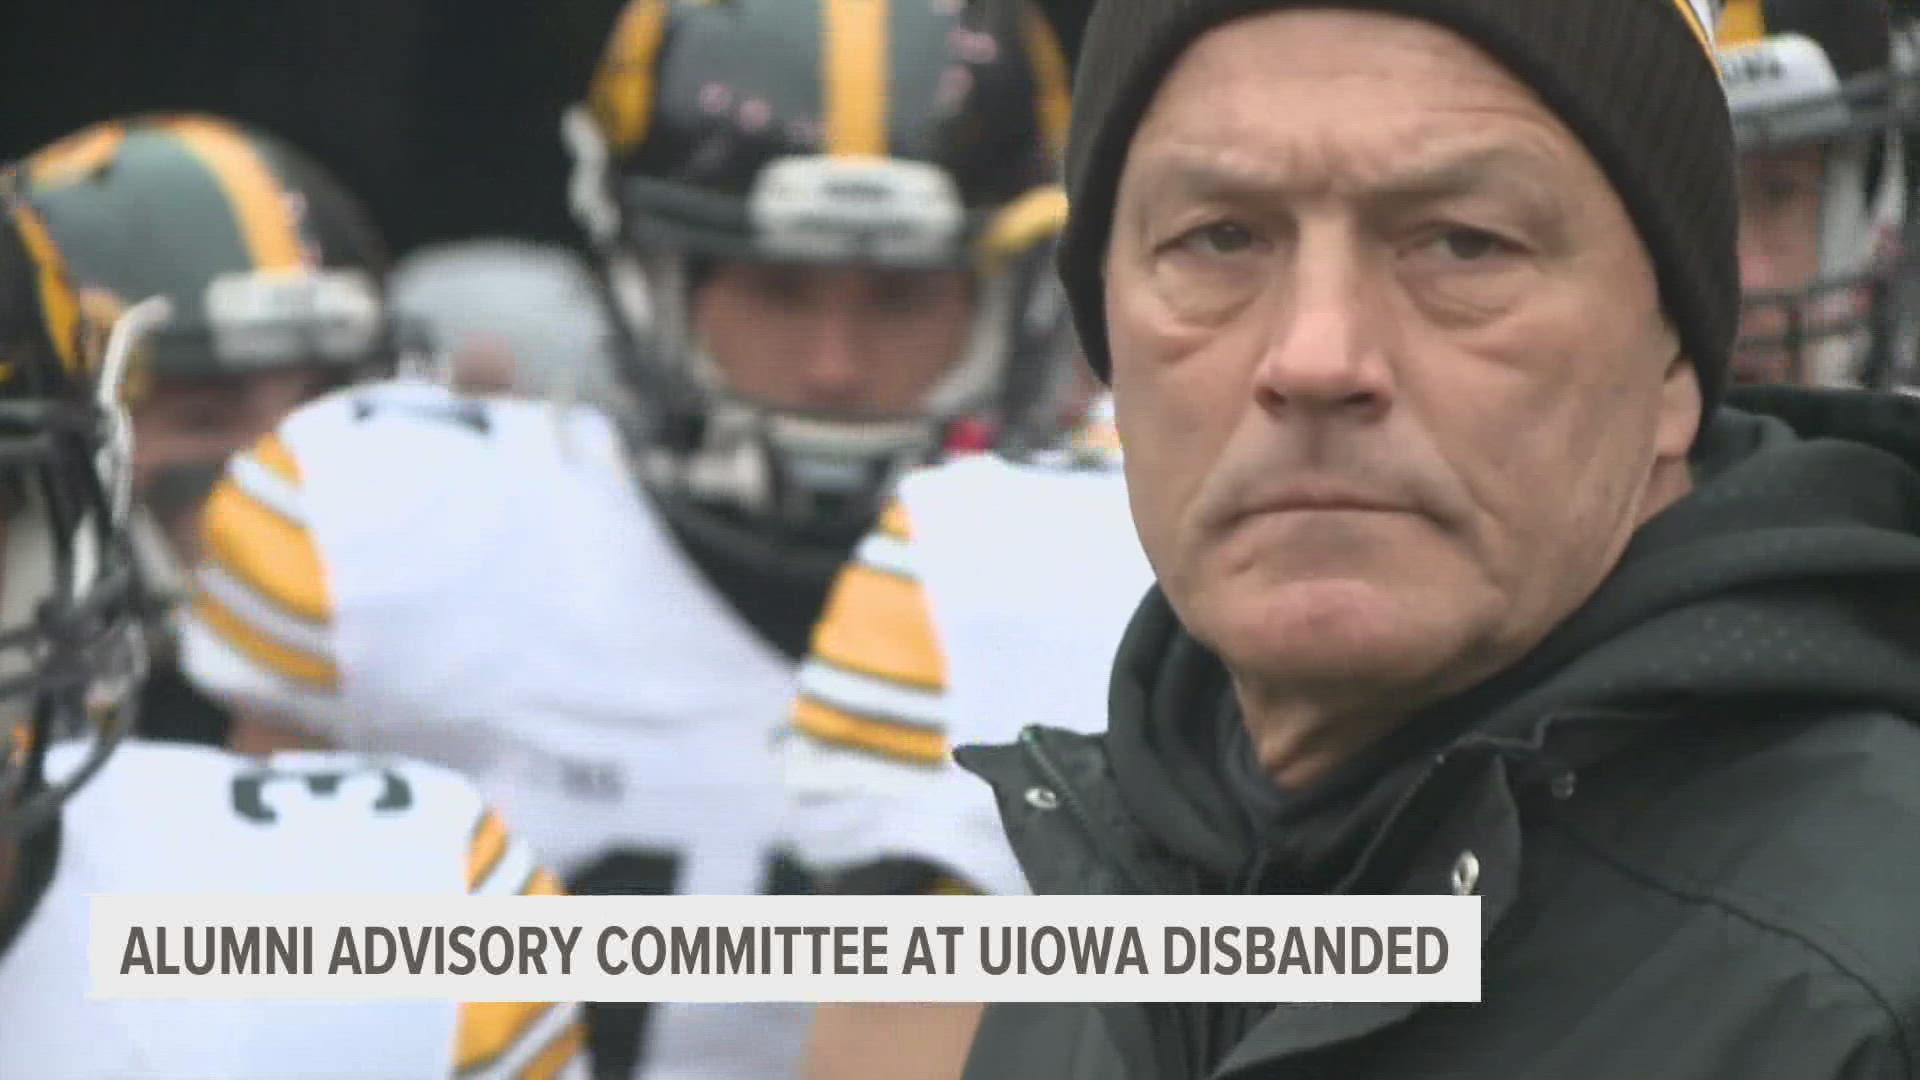 The committee that was created after an investigation found evidence of racial bias against Black players in the Iowa football program